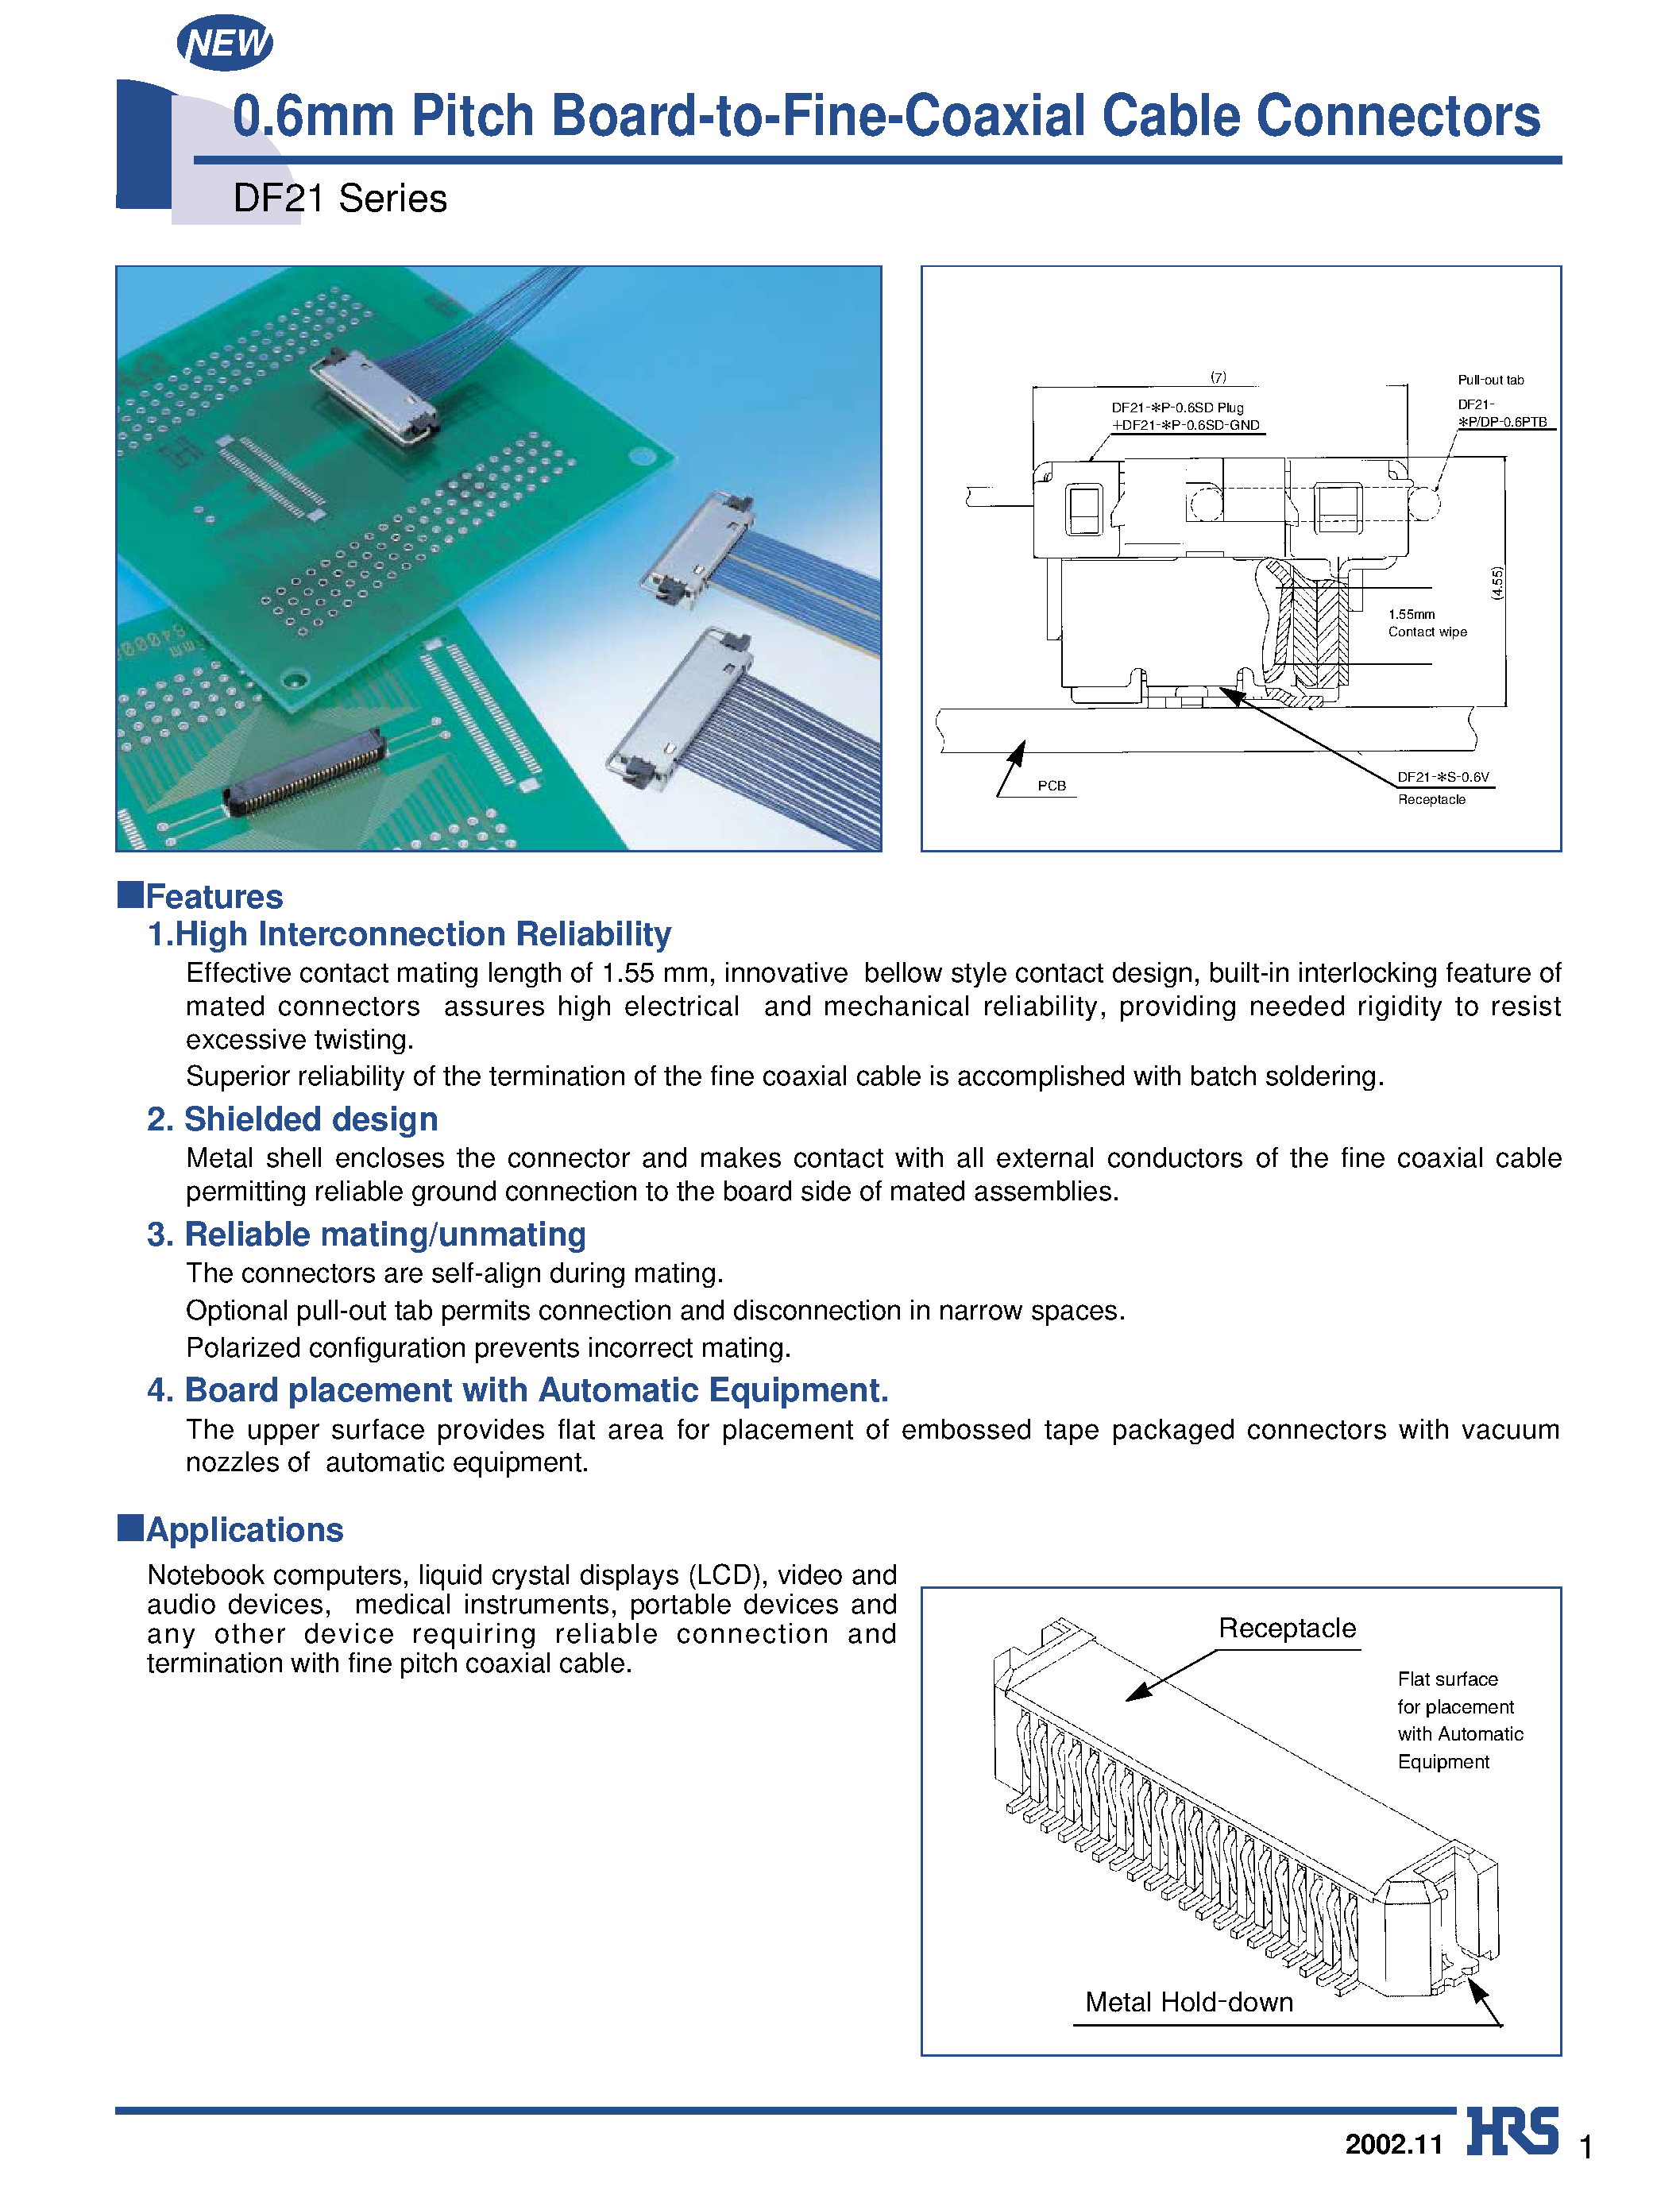 Datasheet DF21-30P-0.6SD - 0.6mm Pitch Board-to-Fine-Coaxial Cable Connectors page 1